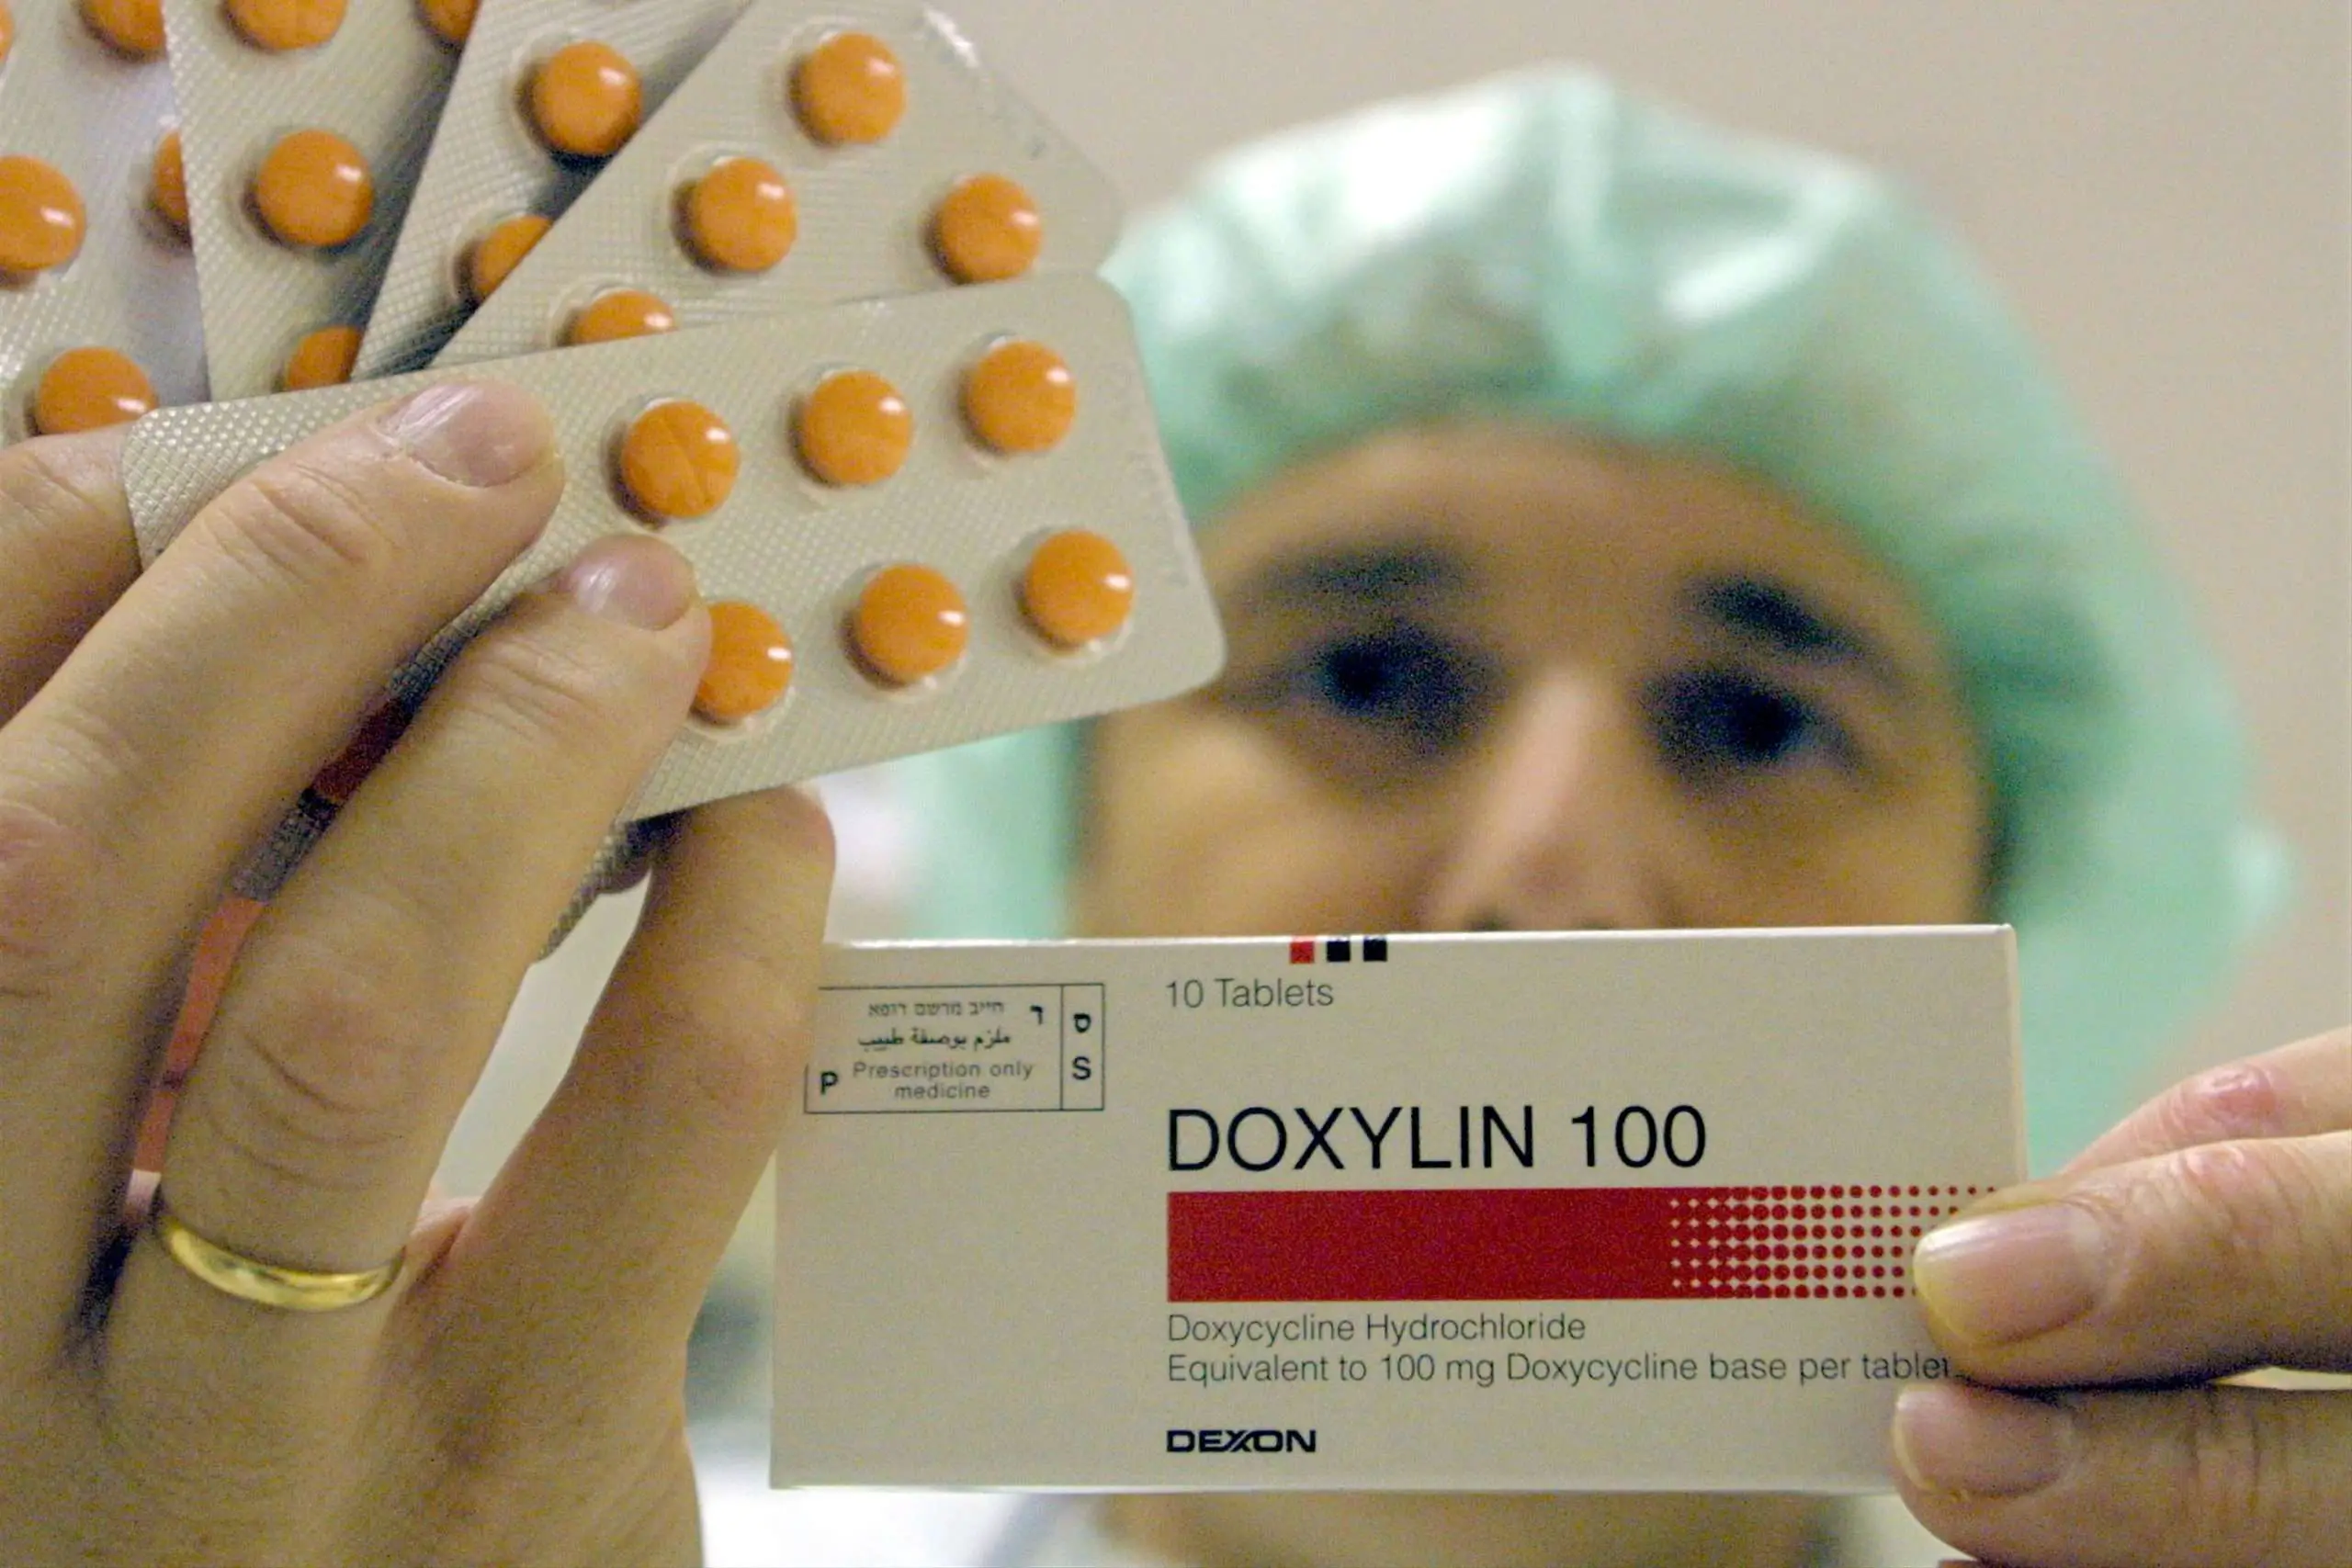 Antibiotic Doxycycline Works No Better Than Placebo In Treating Long ...